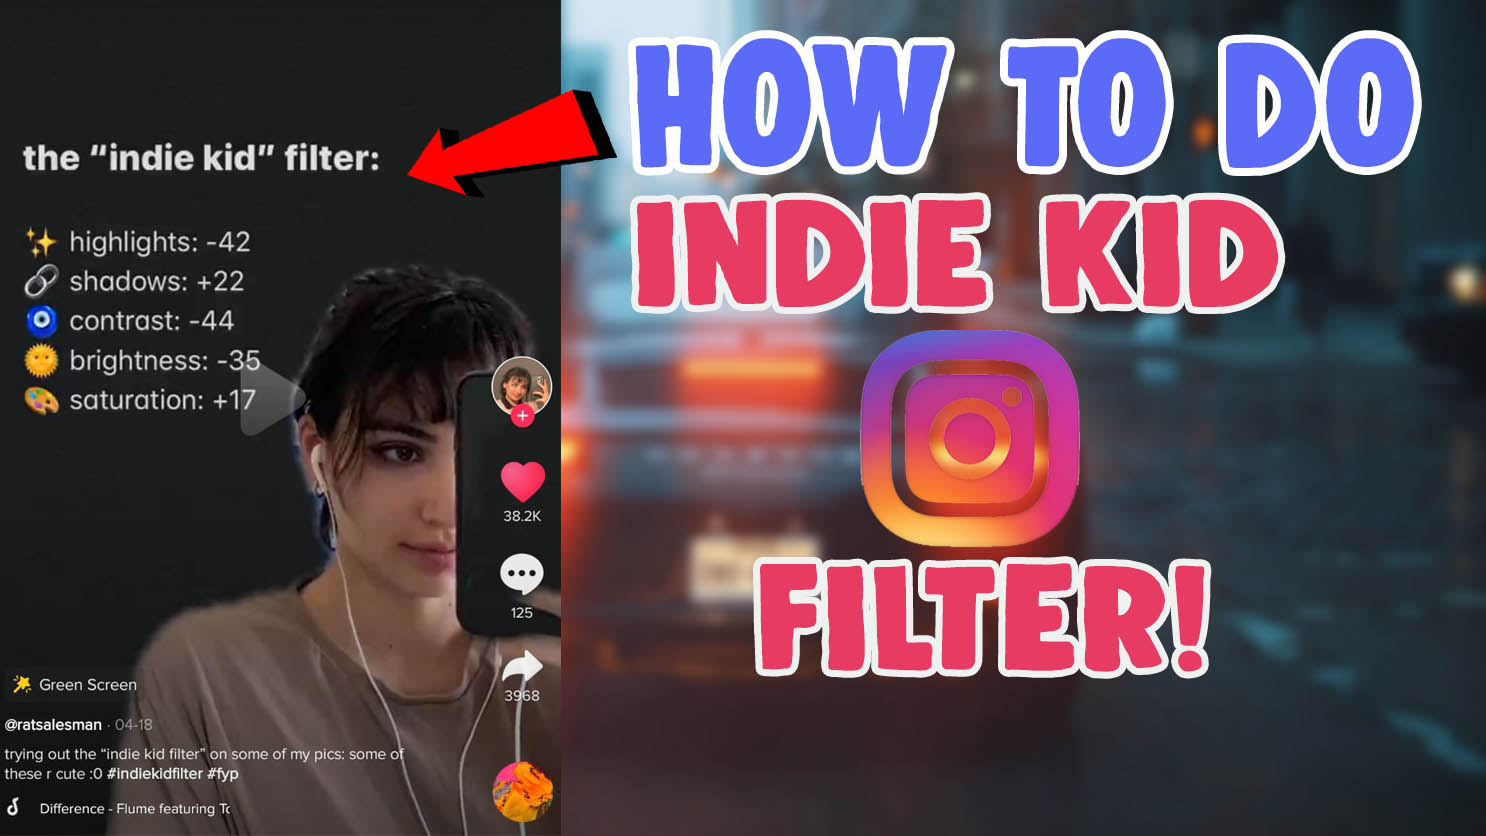 How to make filter on instagram